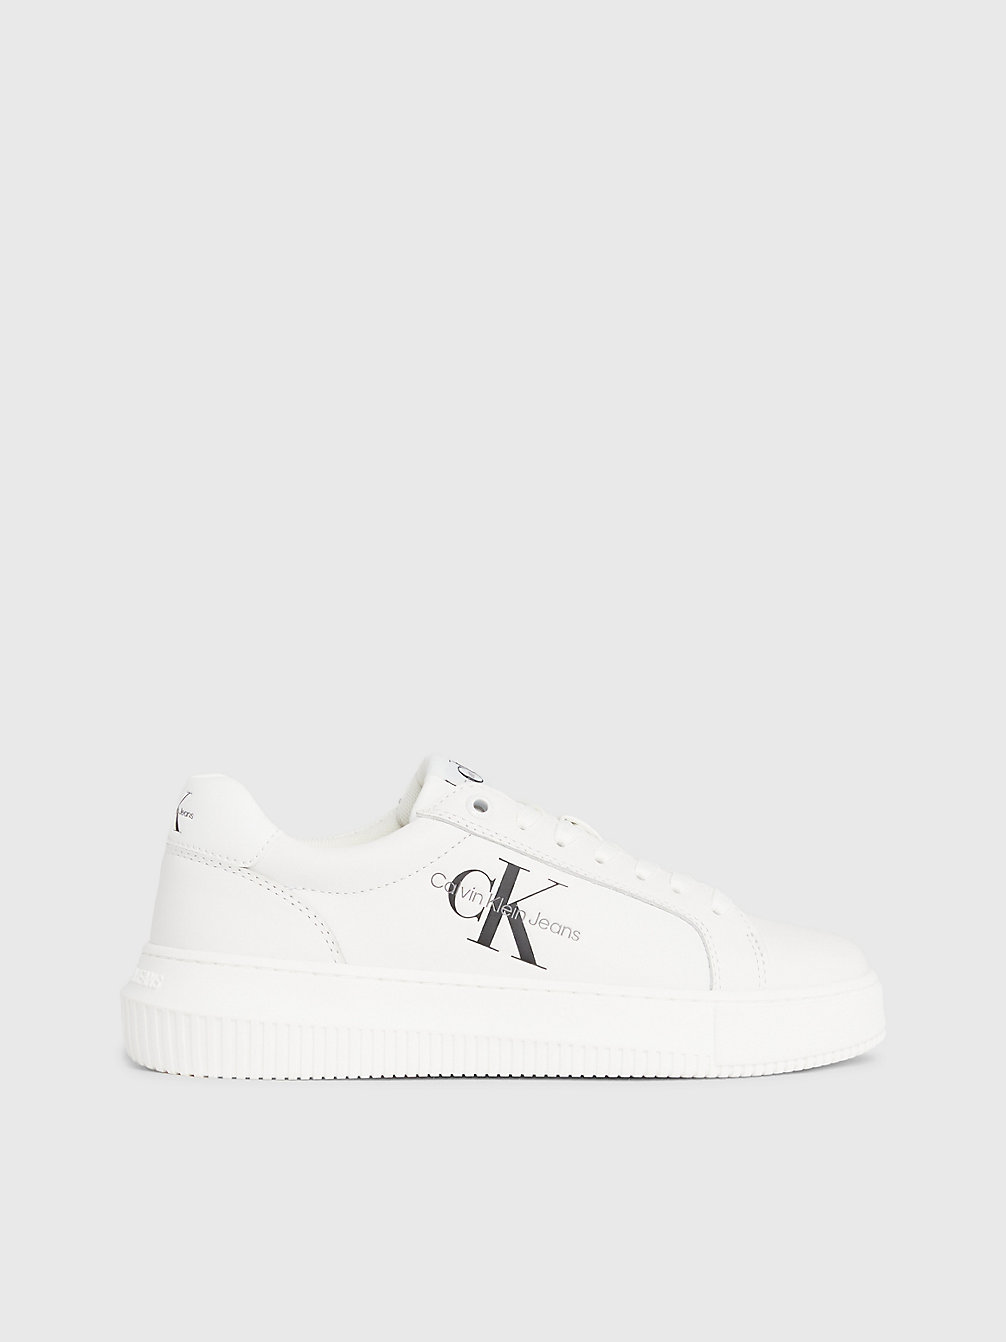 WHITE Leather Trainers undefined women Calvin Klein